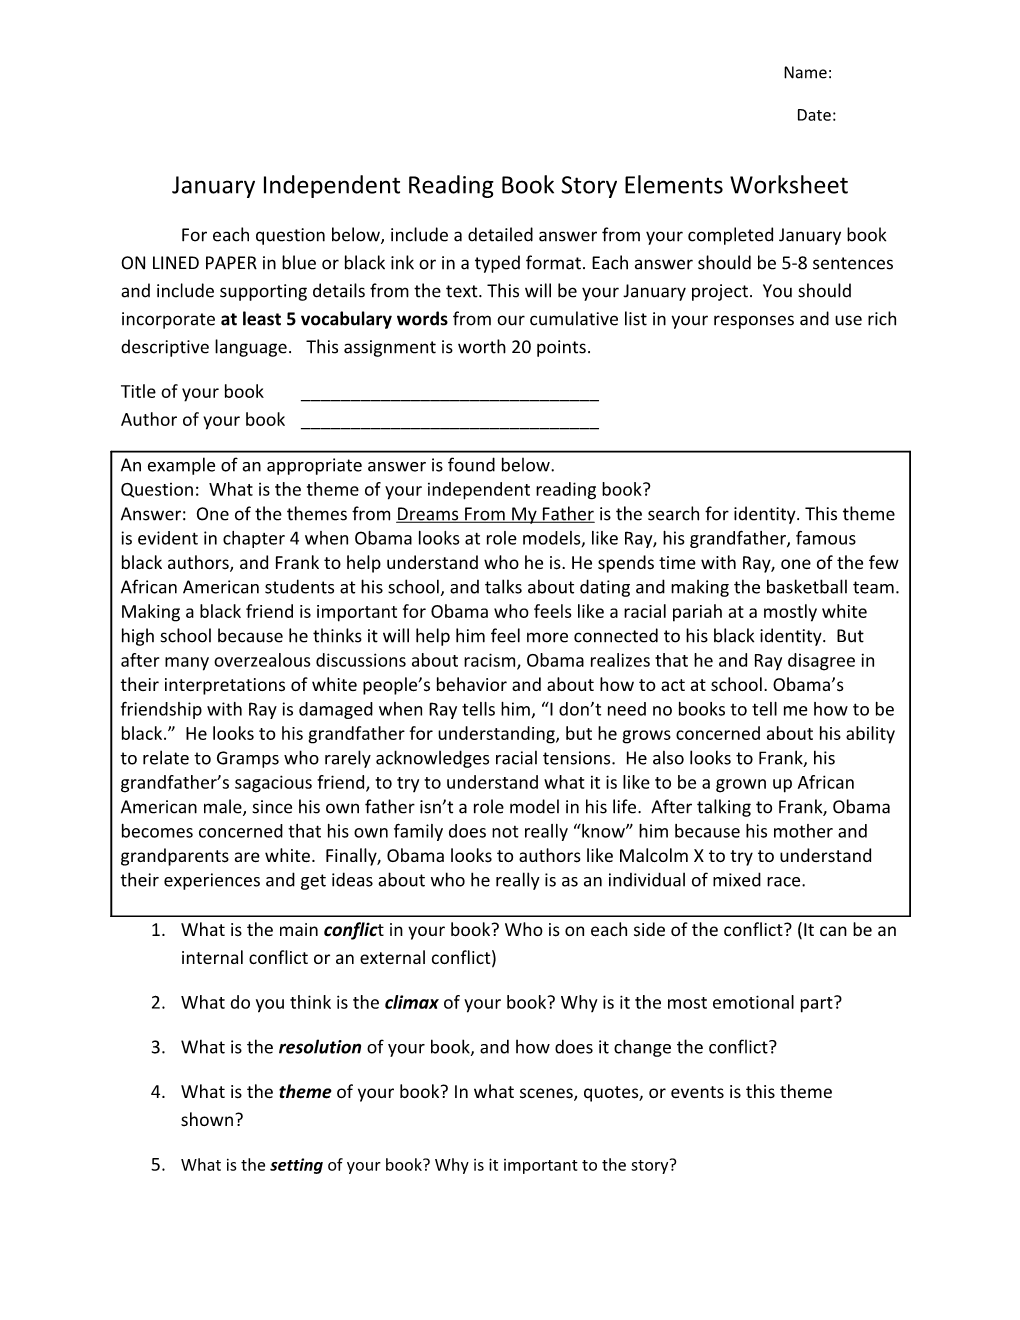 January Independent Reading Book Story Elements Worksheet